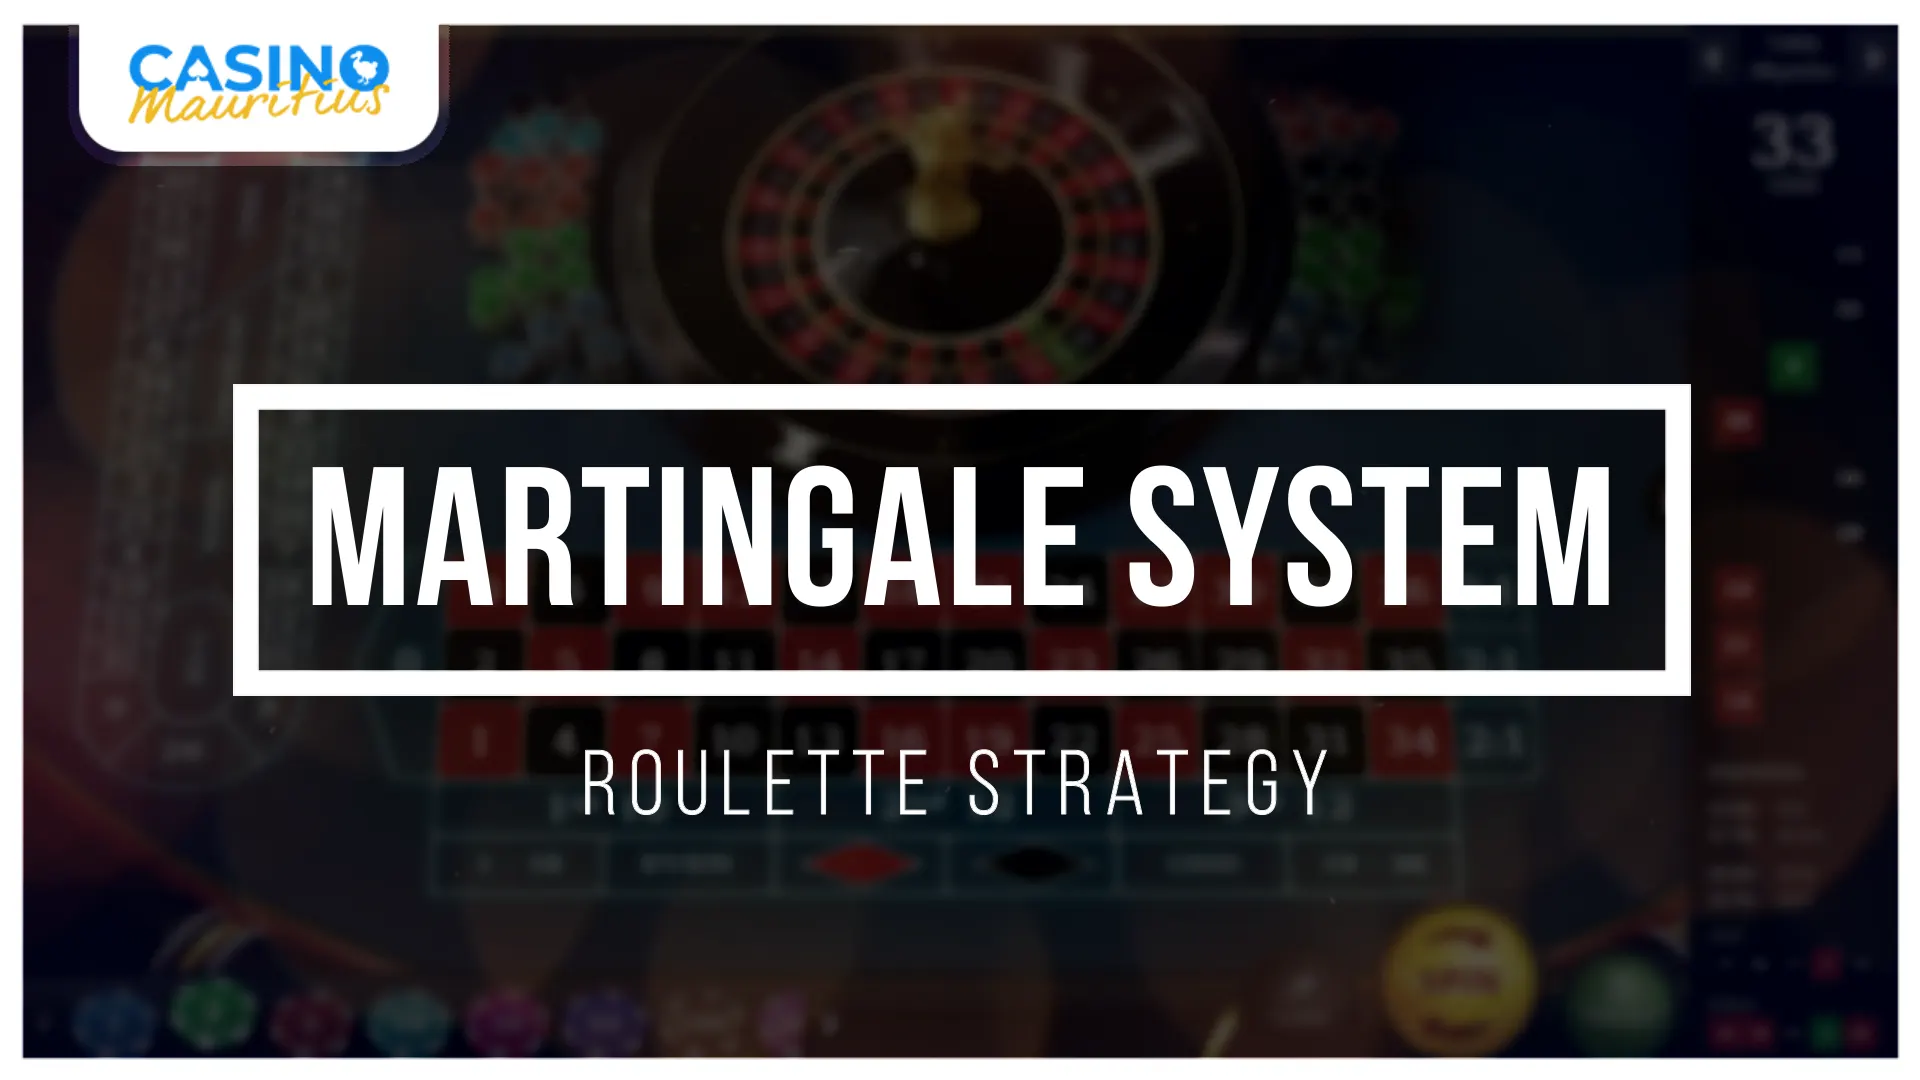 Martingale System - Roulette strategy